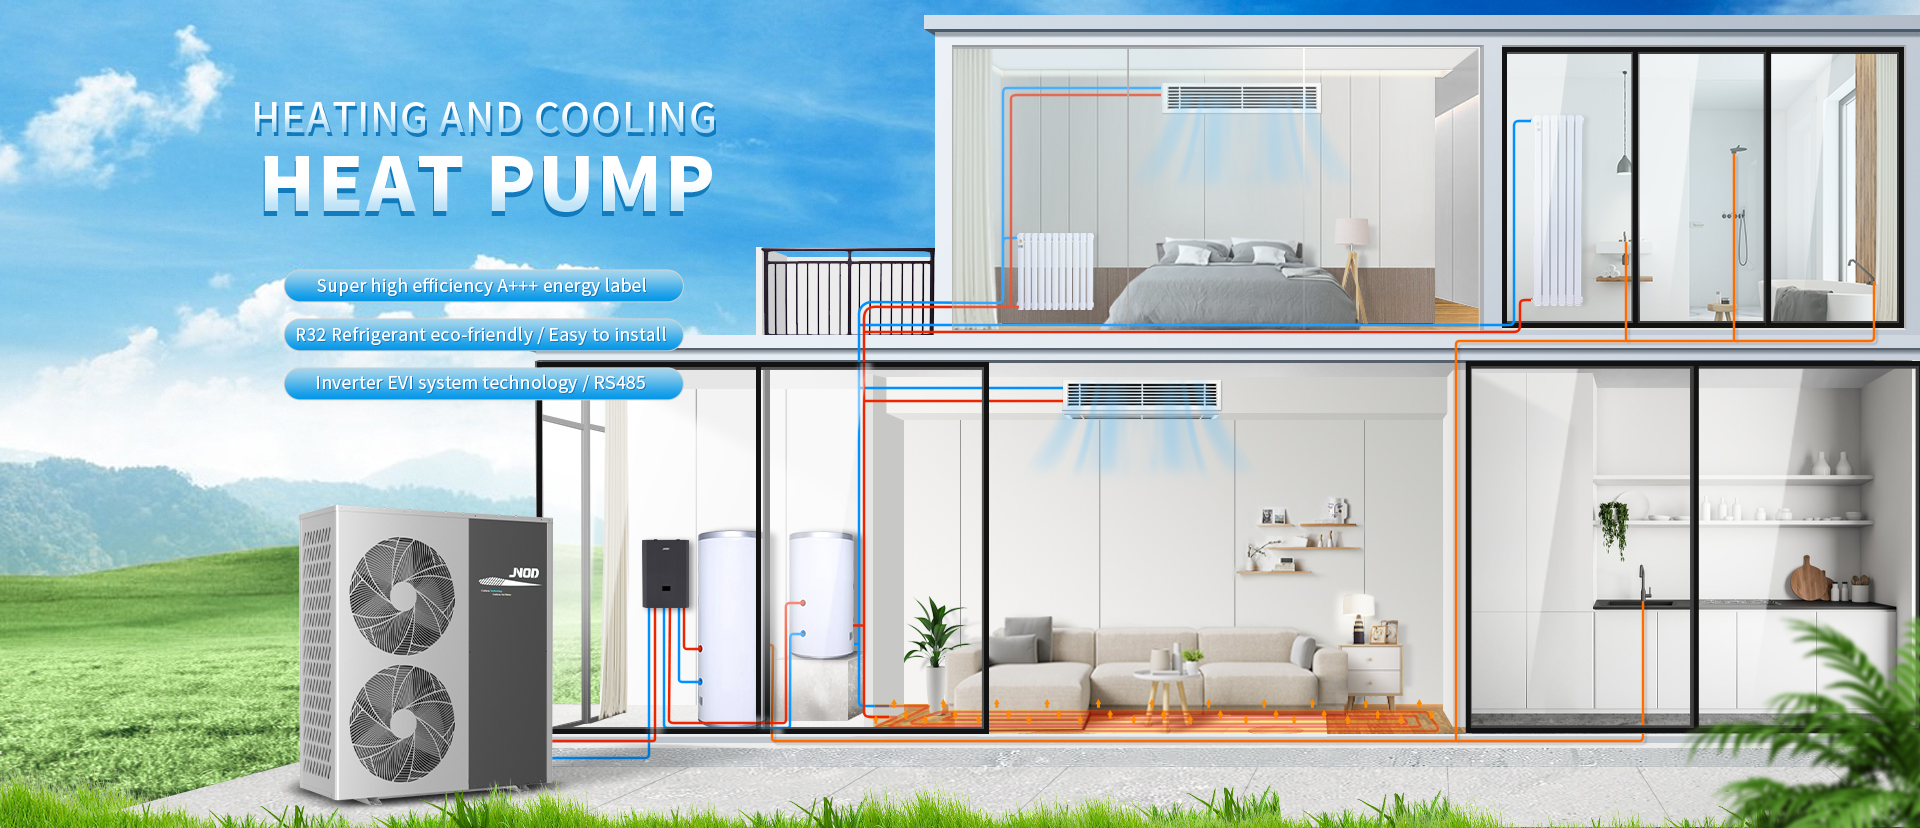 Heating And Cooling Heat Pump Wholesale prices